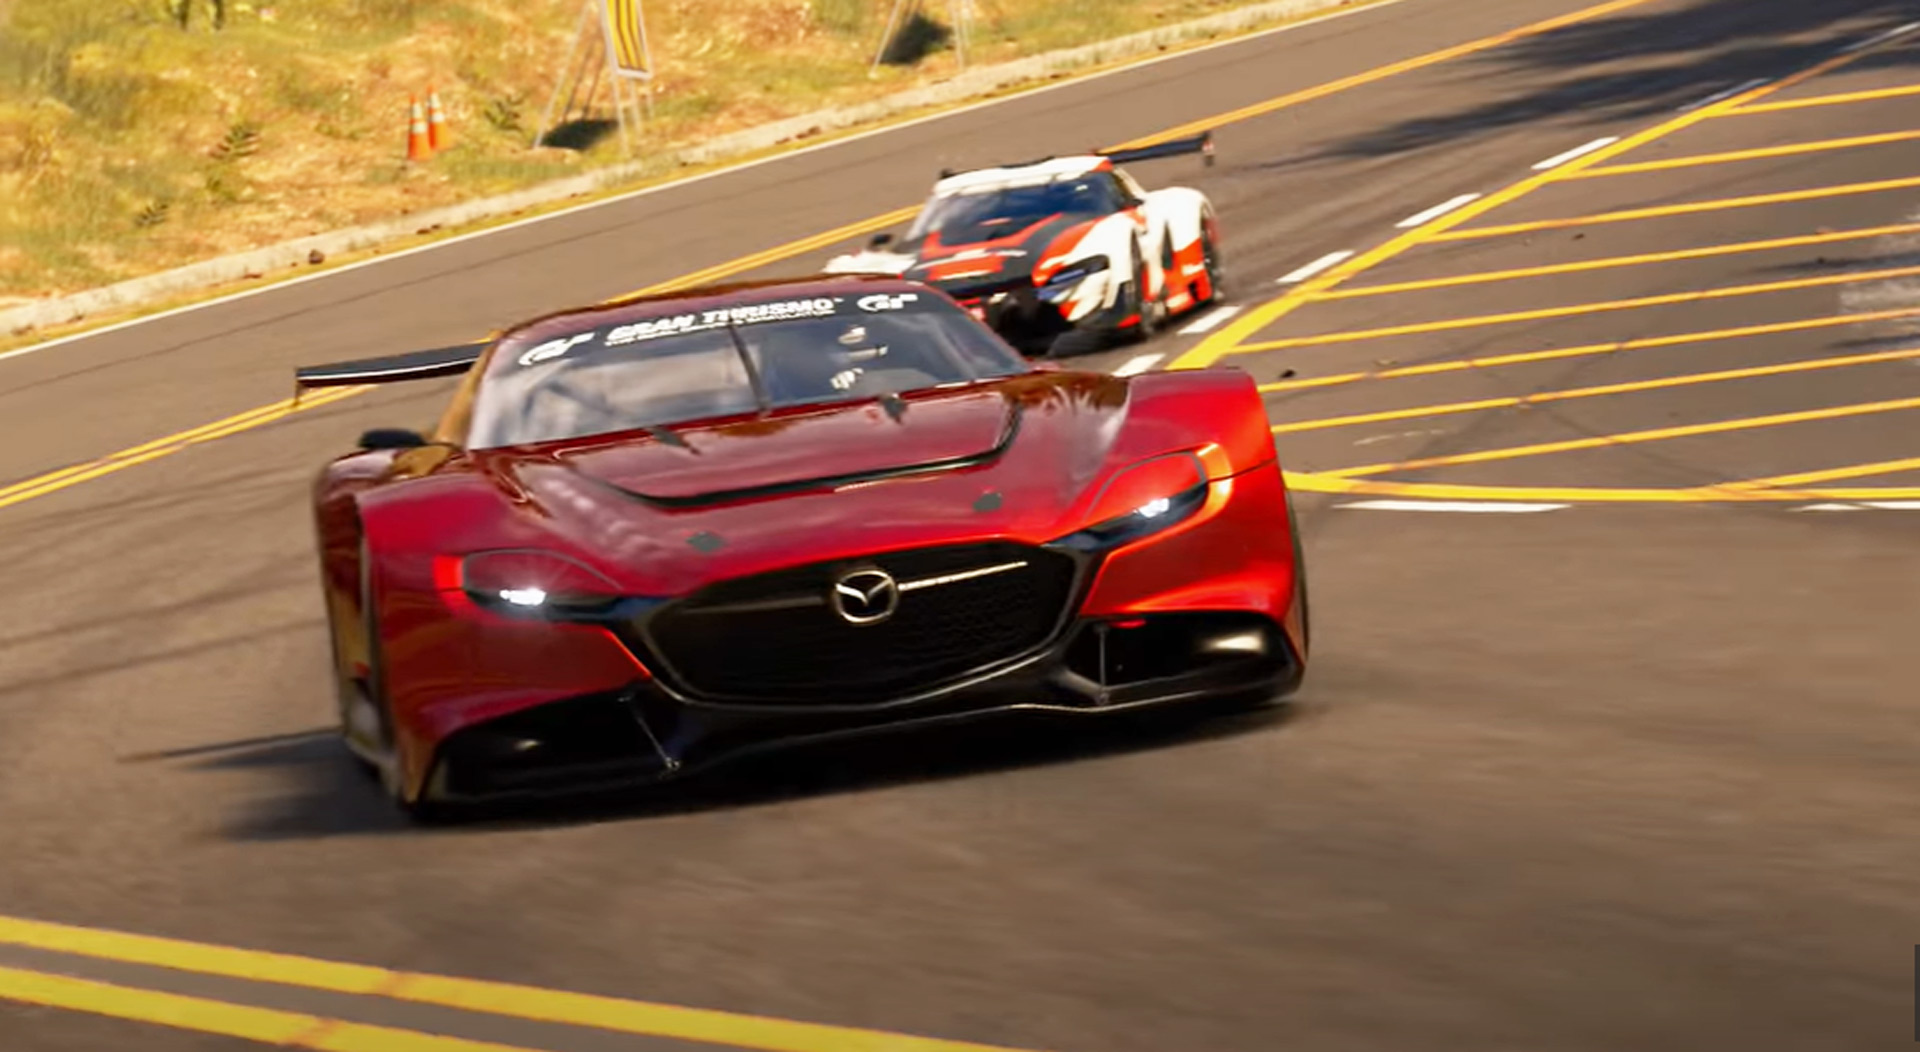 PS5 title Gran Turismo 7 will be a must-buy to see PlayStation 5's